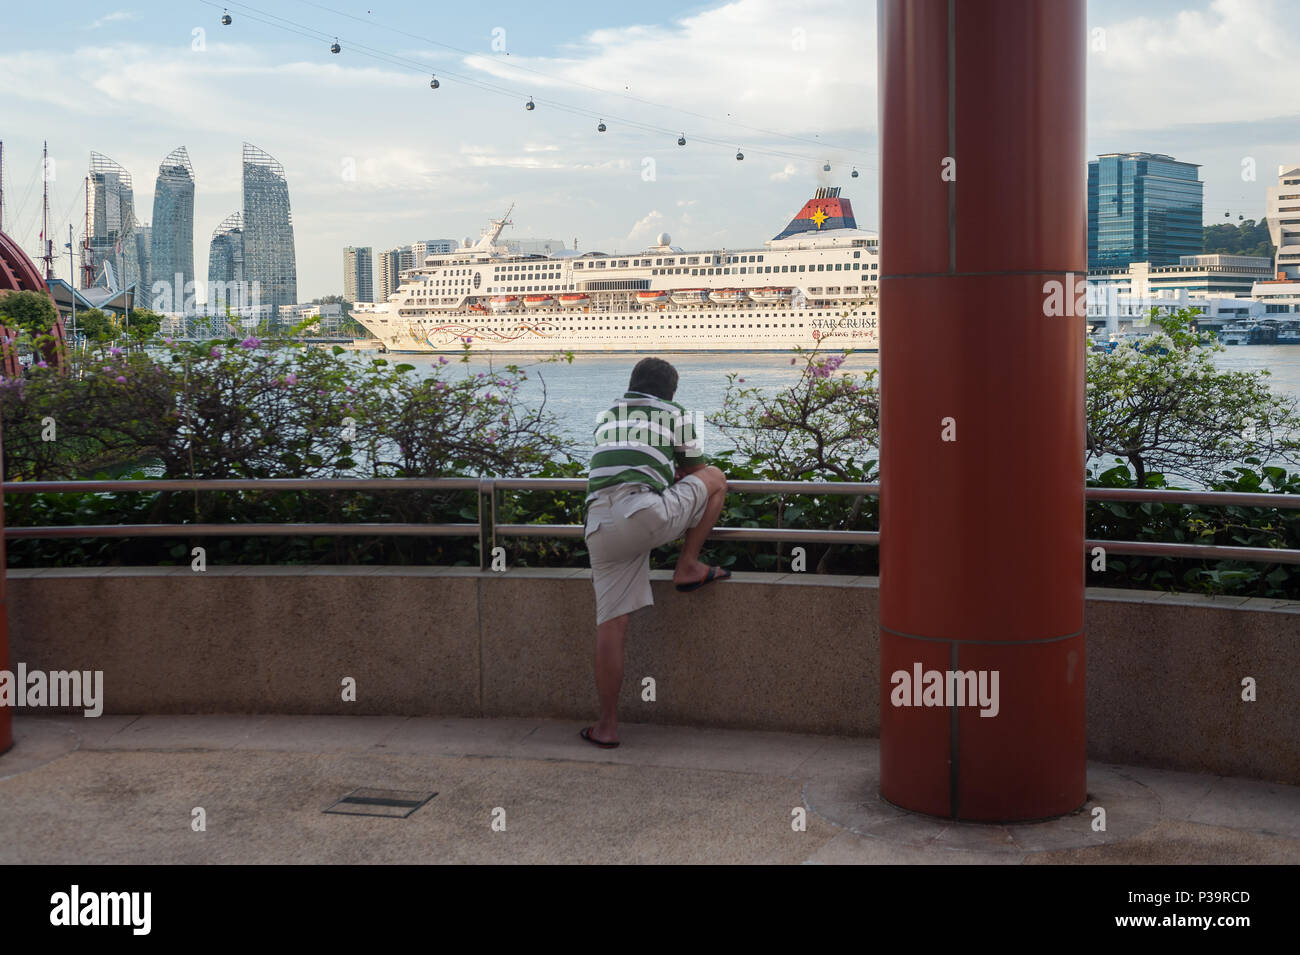 Singapore, Republic of Singapore, a cruise ship on the Harbourfront Stock Photo